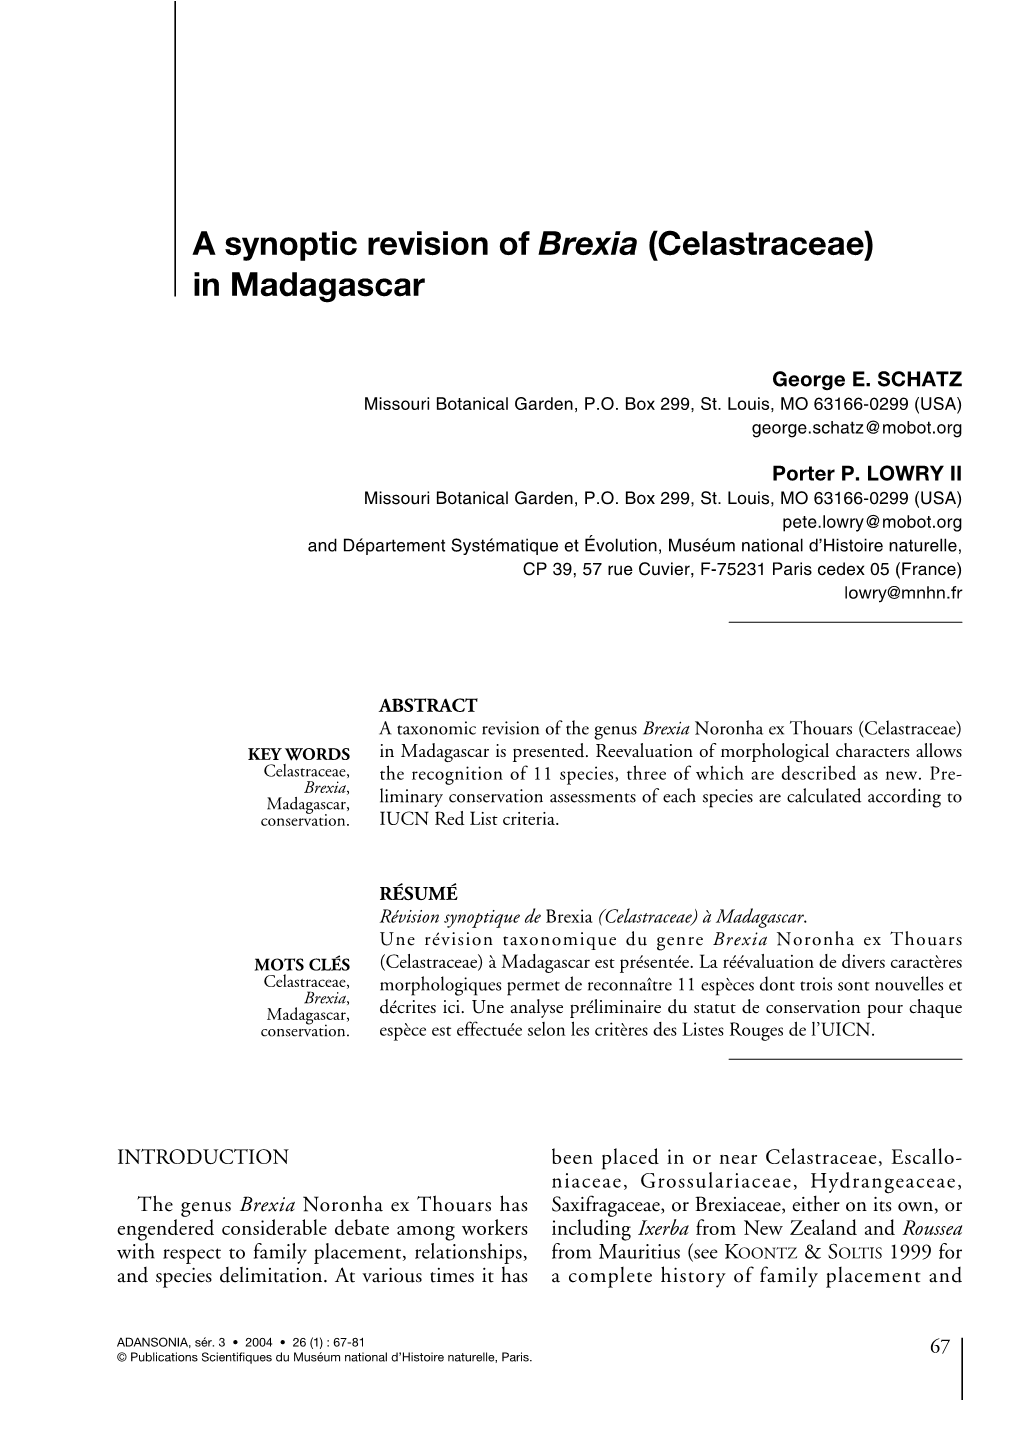 A Synoptic Revision of Brexia (Celastraceae) in Madagascar